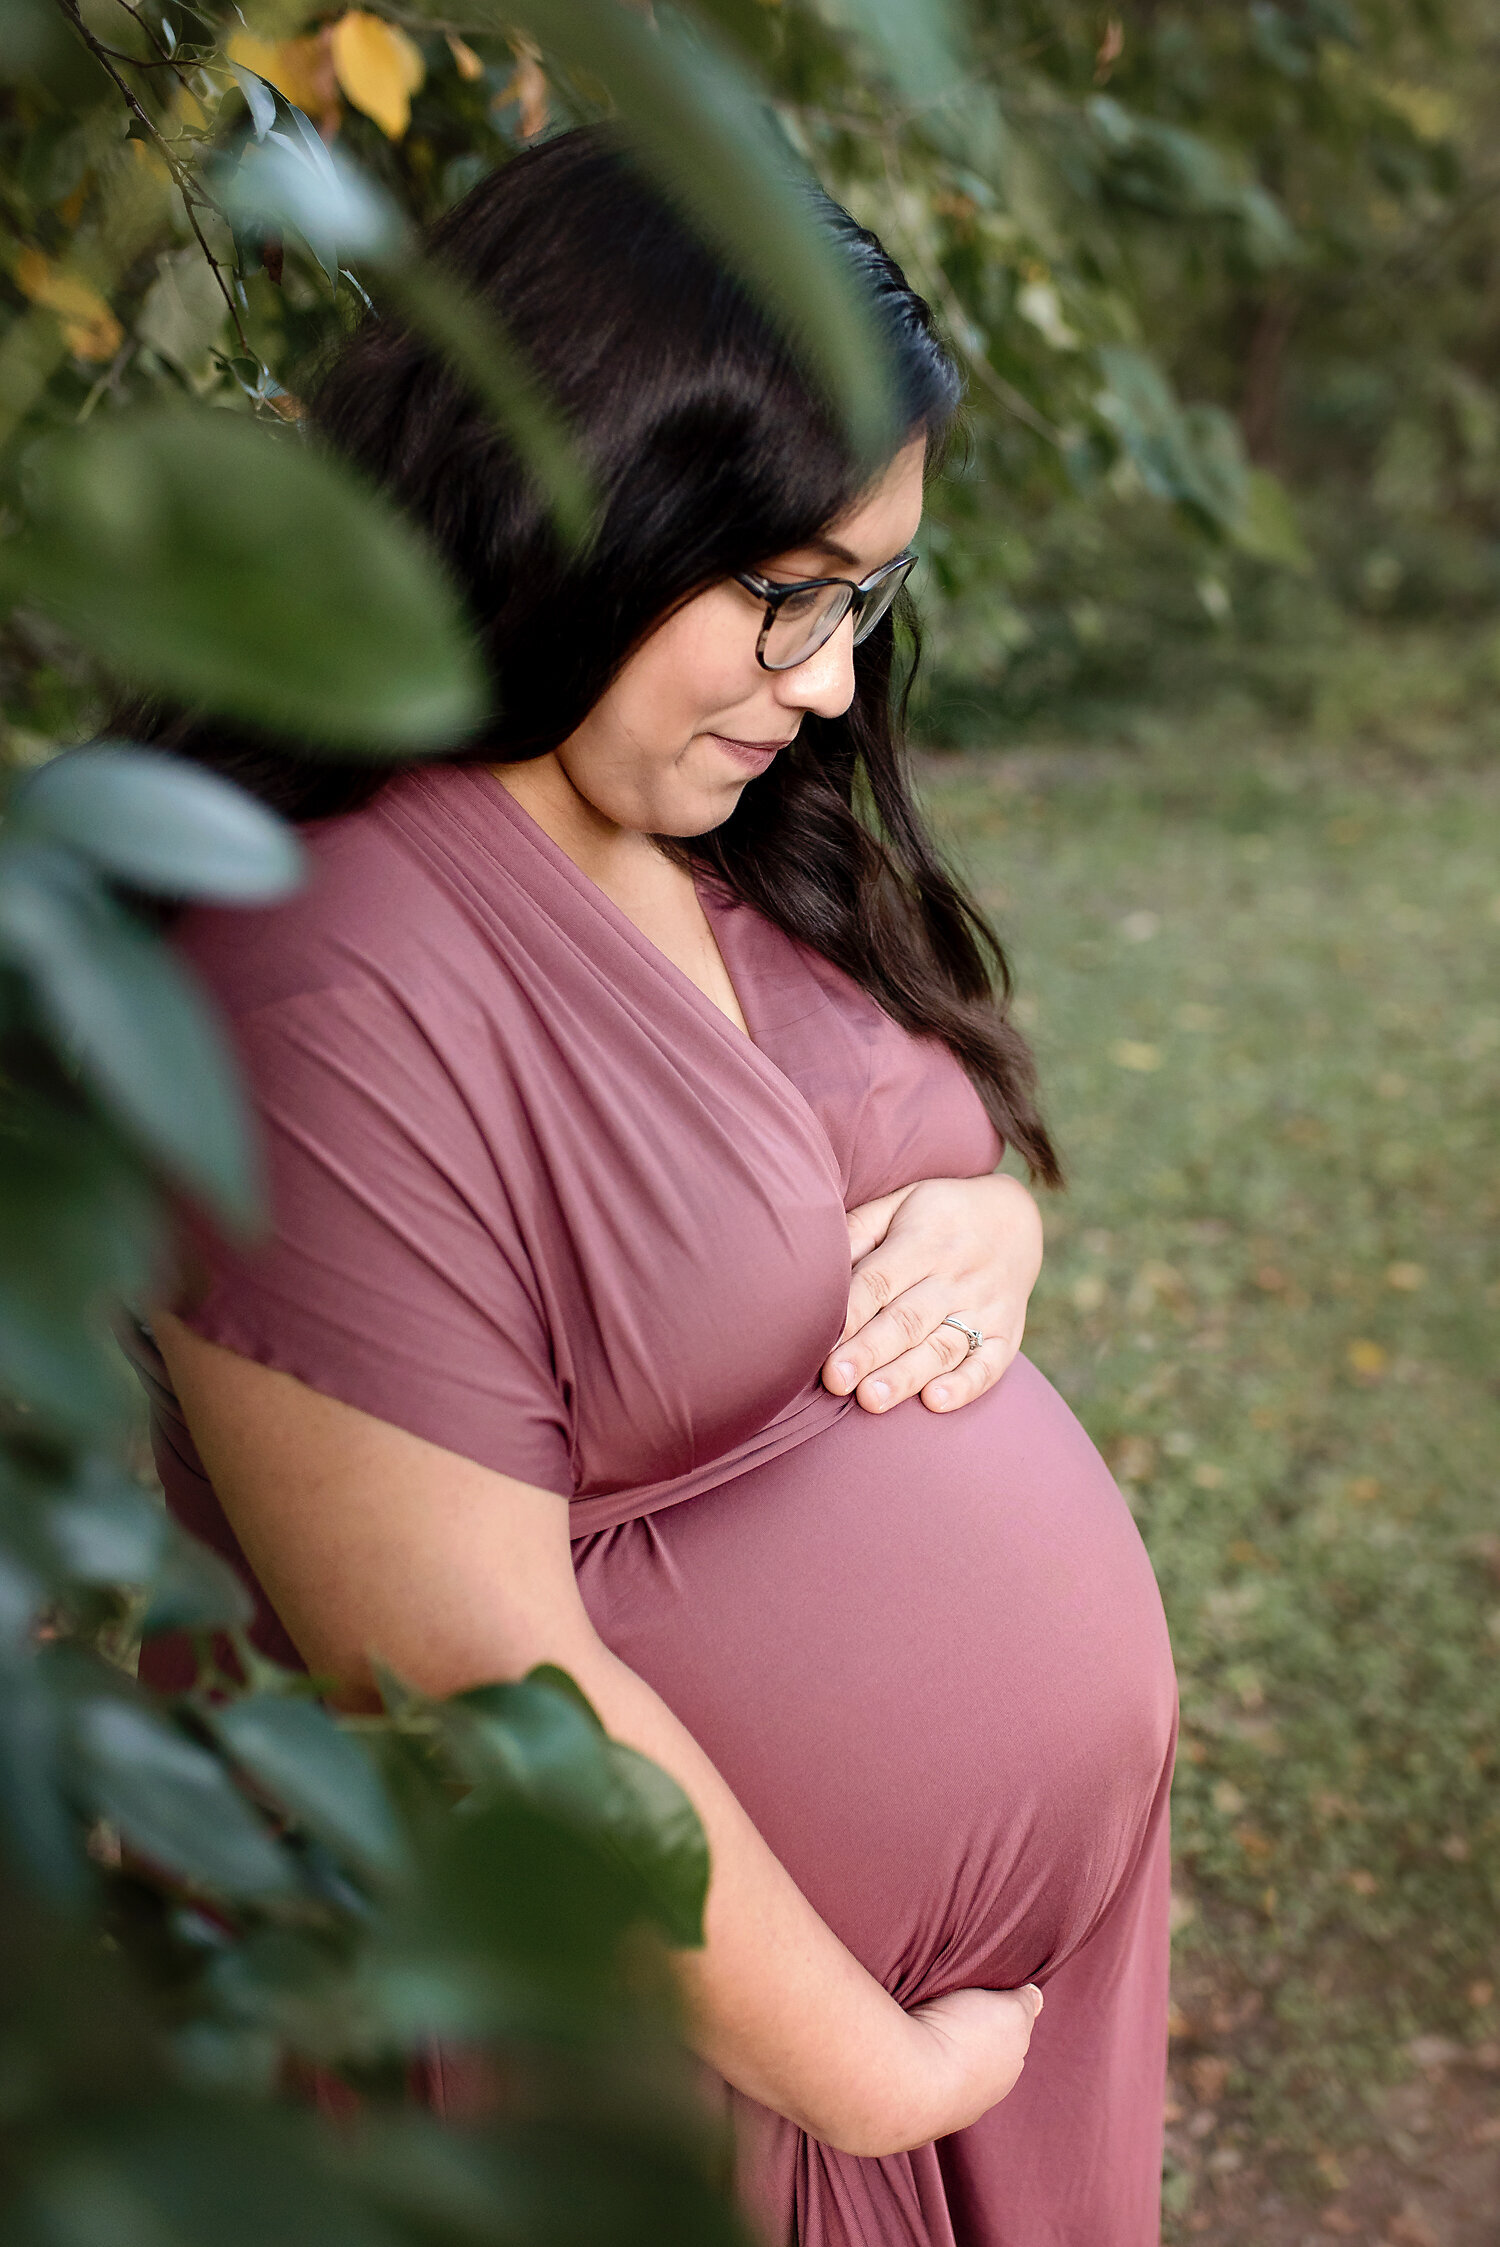 A pregnant woman holding her belly while standing behind leaves.